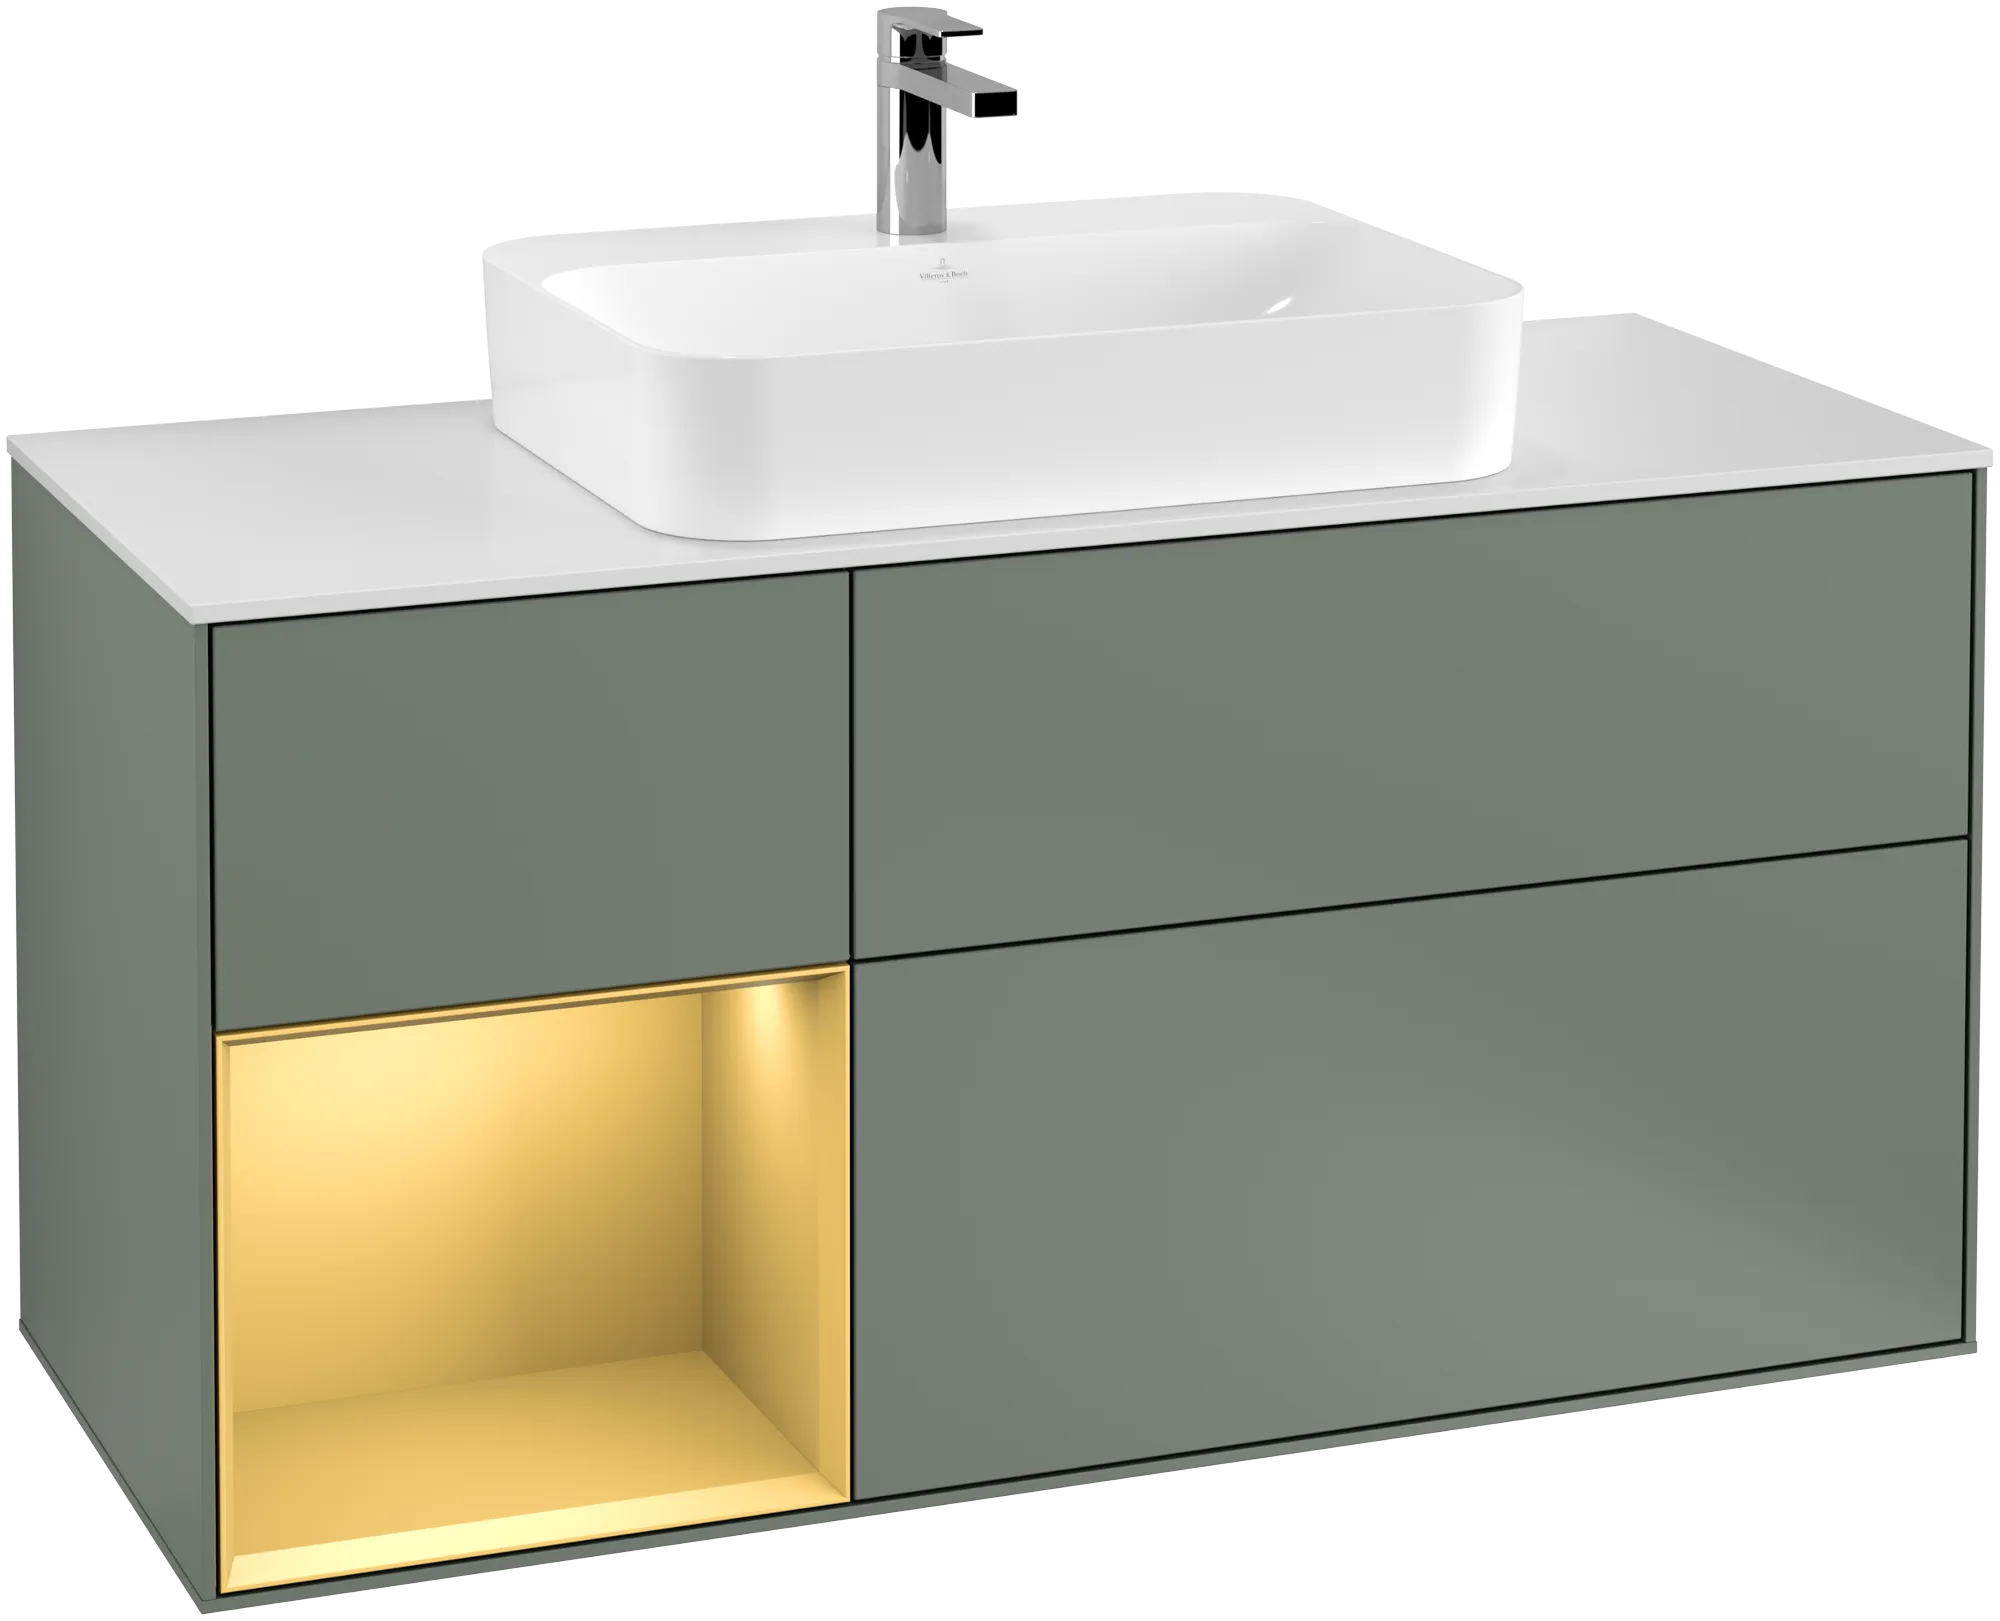 VILLEROY BOCH Finion Vanity unit, with lighting, 3 pull-out compartments, 1200 x 603 x 501 mm, Olive Matt Lacquer / Gold Matt Lacquer / Glass White Matt #G411HFGM resmi